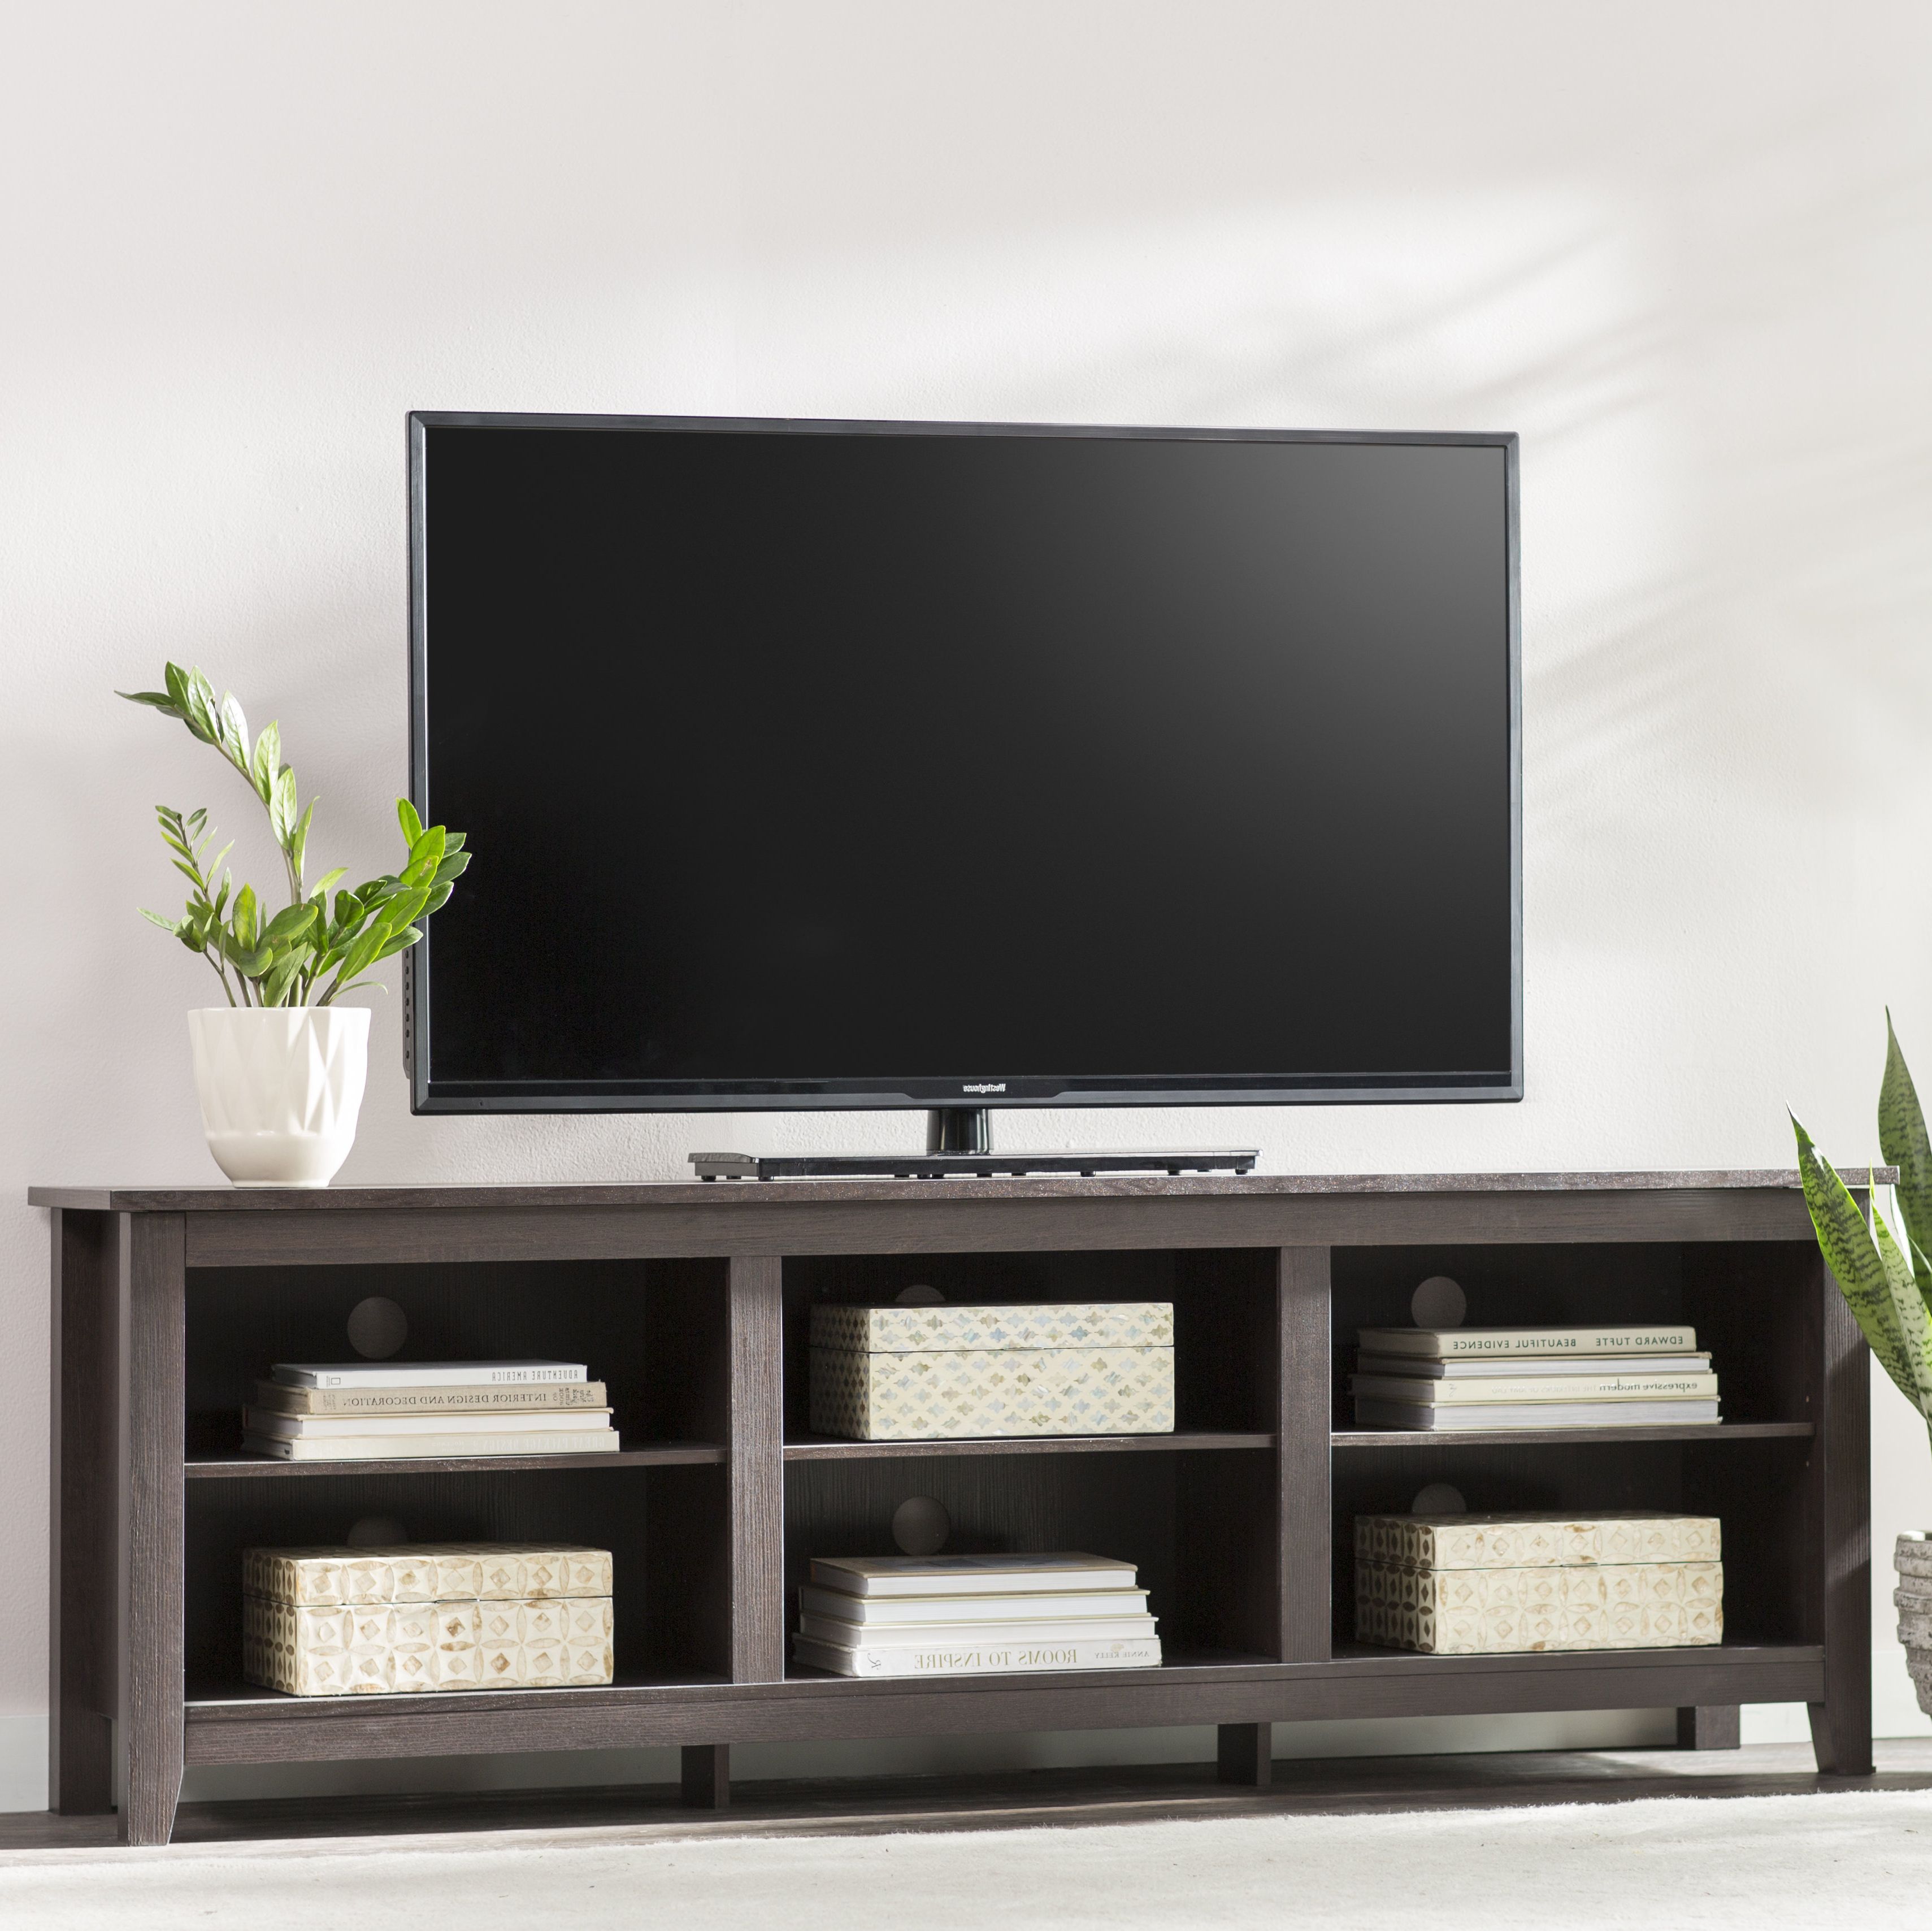 Most Popular Bookshelf And Tv Stands With Regard To Tv Stands & Entertainment Centers You'll Love (View 14 of 20)